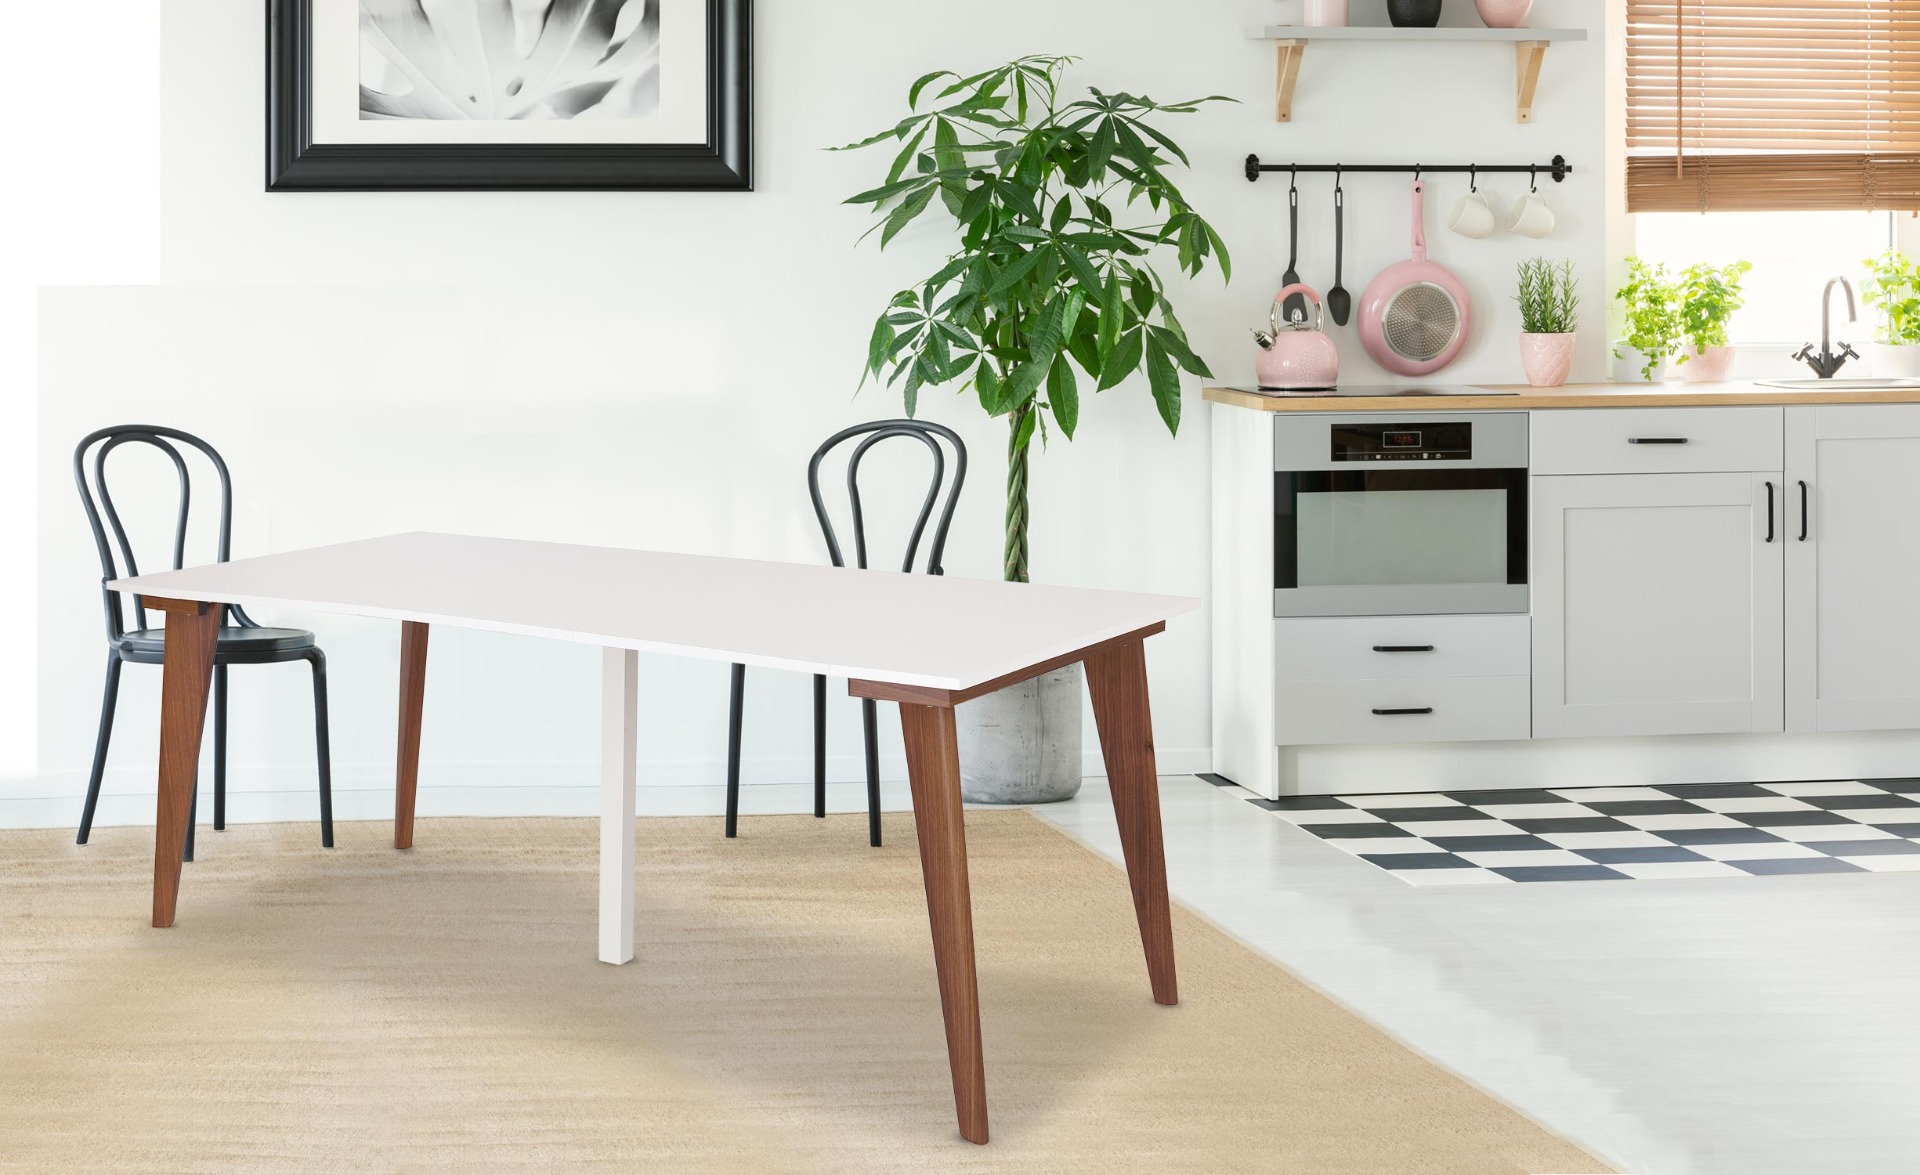 Table Console extensible Flavie Blanc